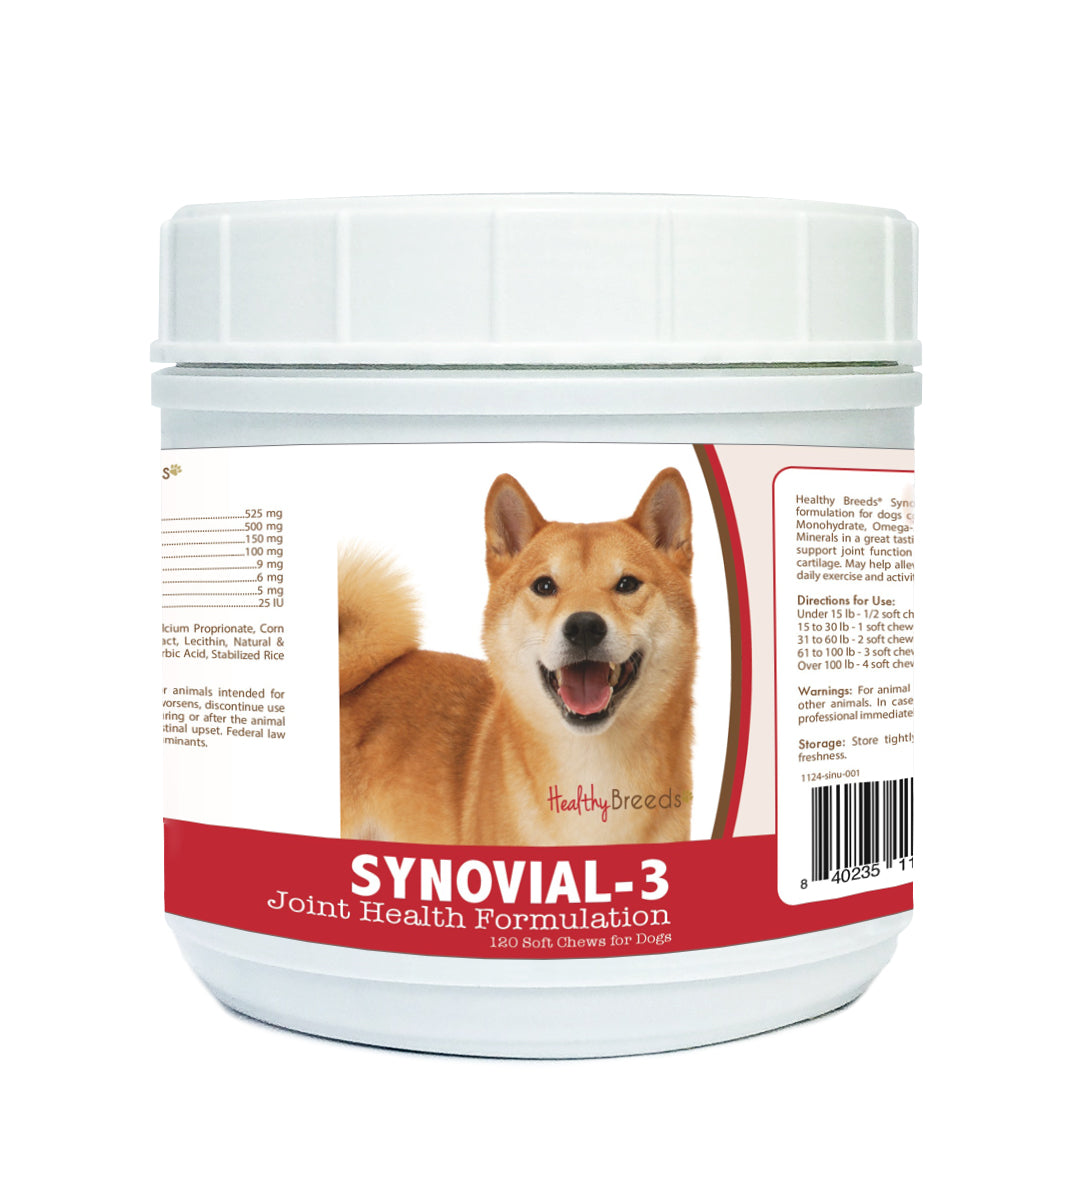 Shiba Inu Synovial-3 Joint Health Formulation Soft Chews 120 Count